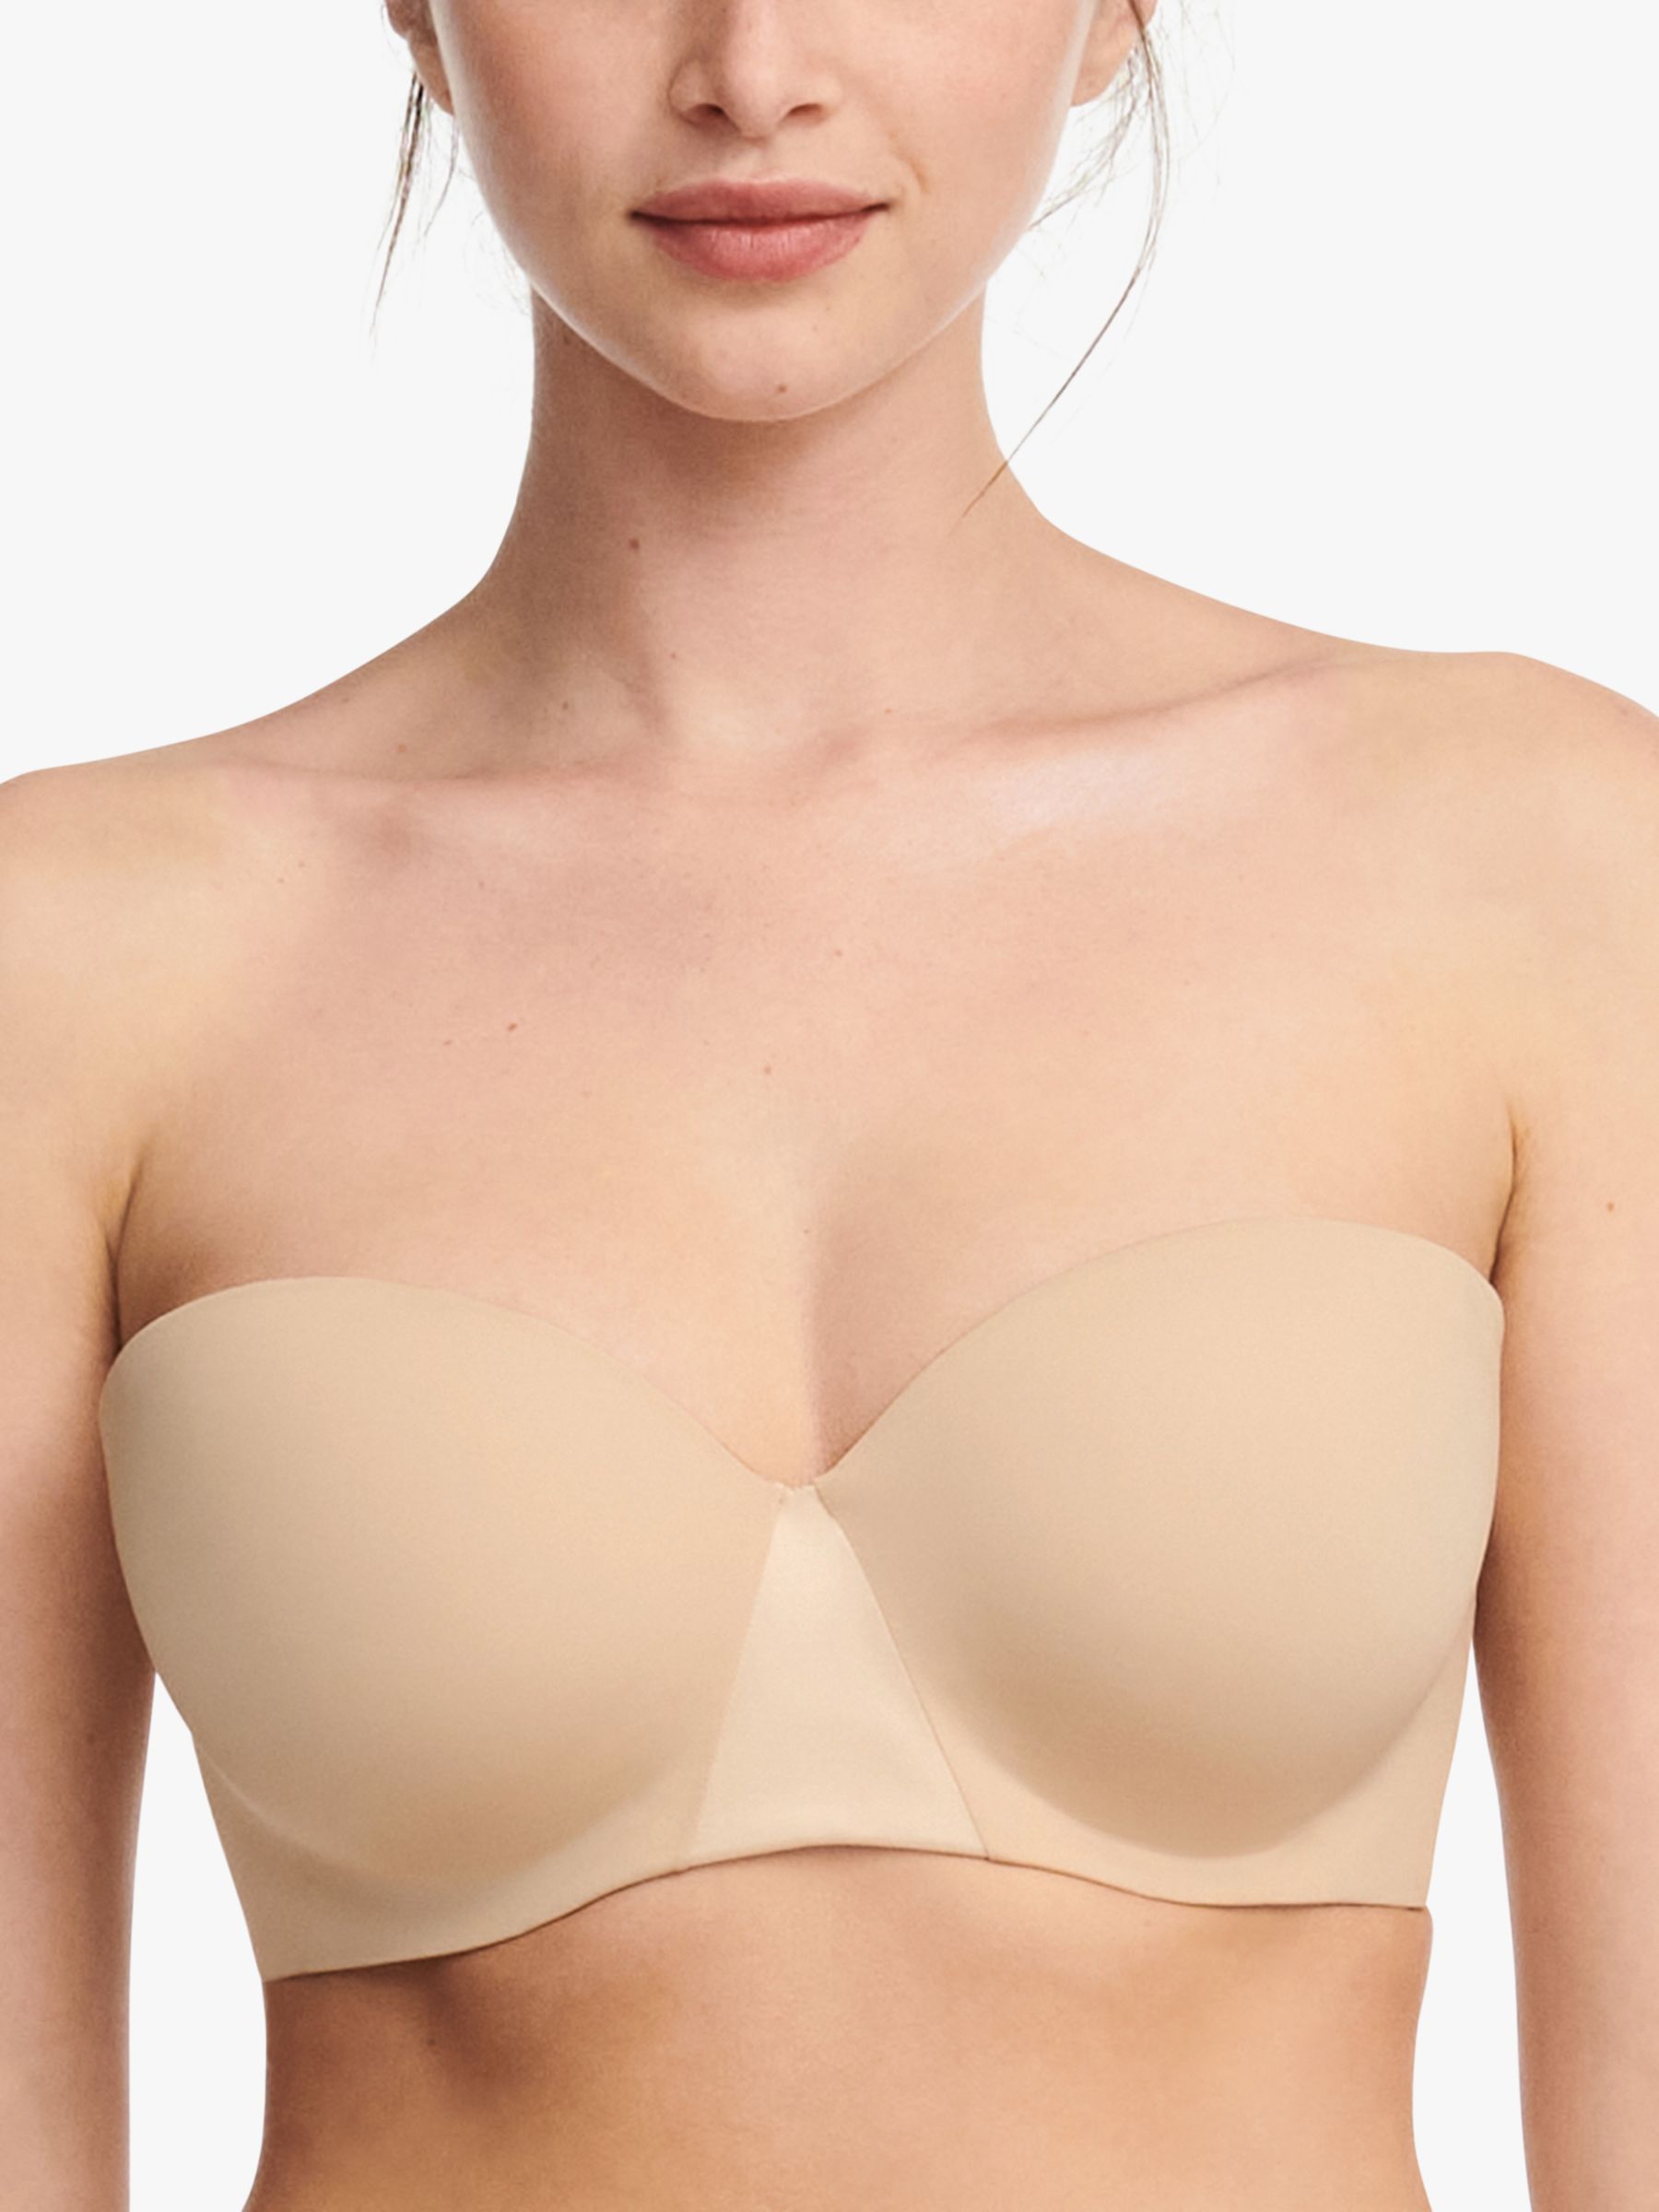 Full Cup Bra Size: 32F Page 5 of 7